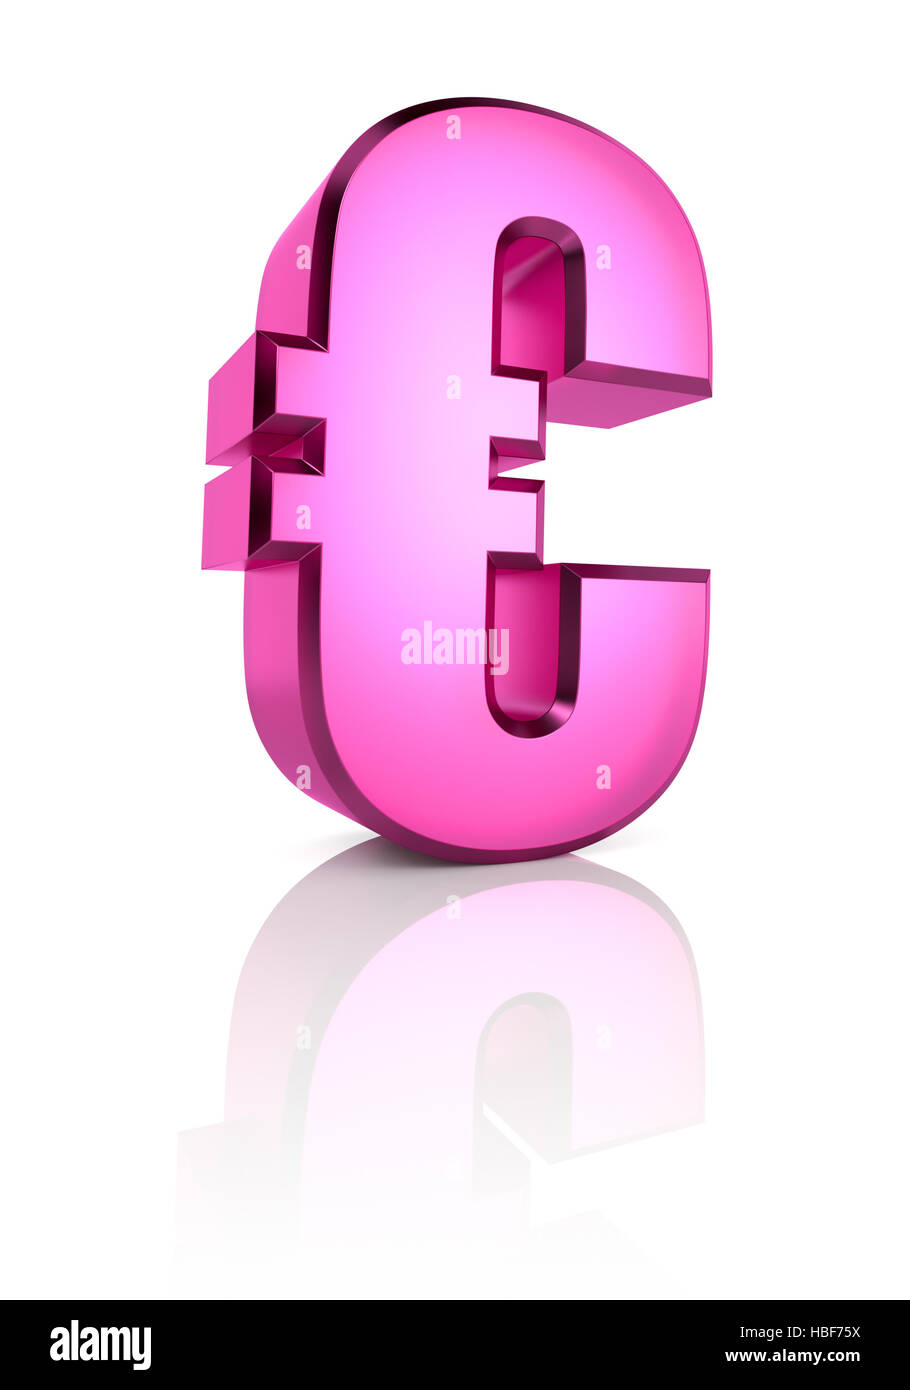 Pink Euro Currency Symbol Stock Photo